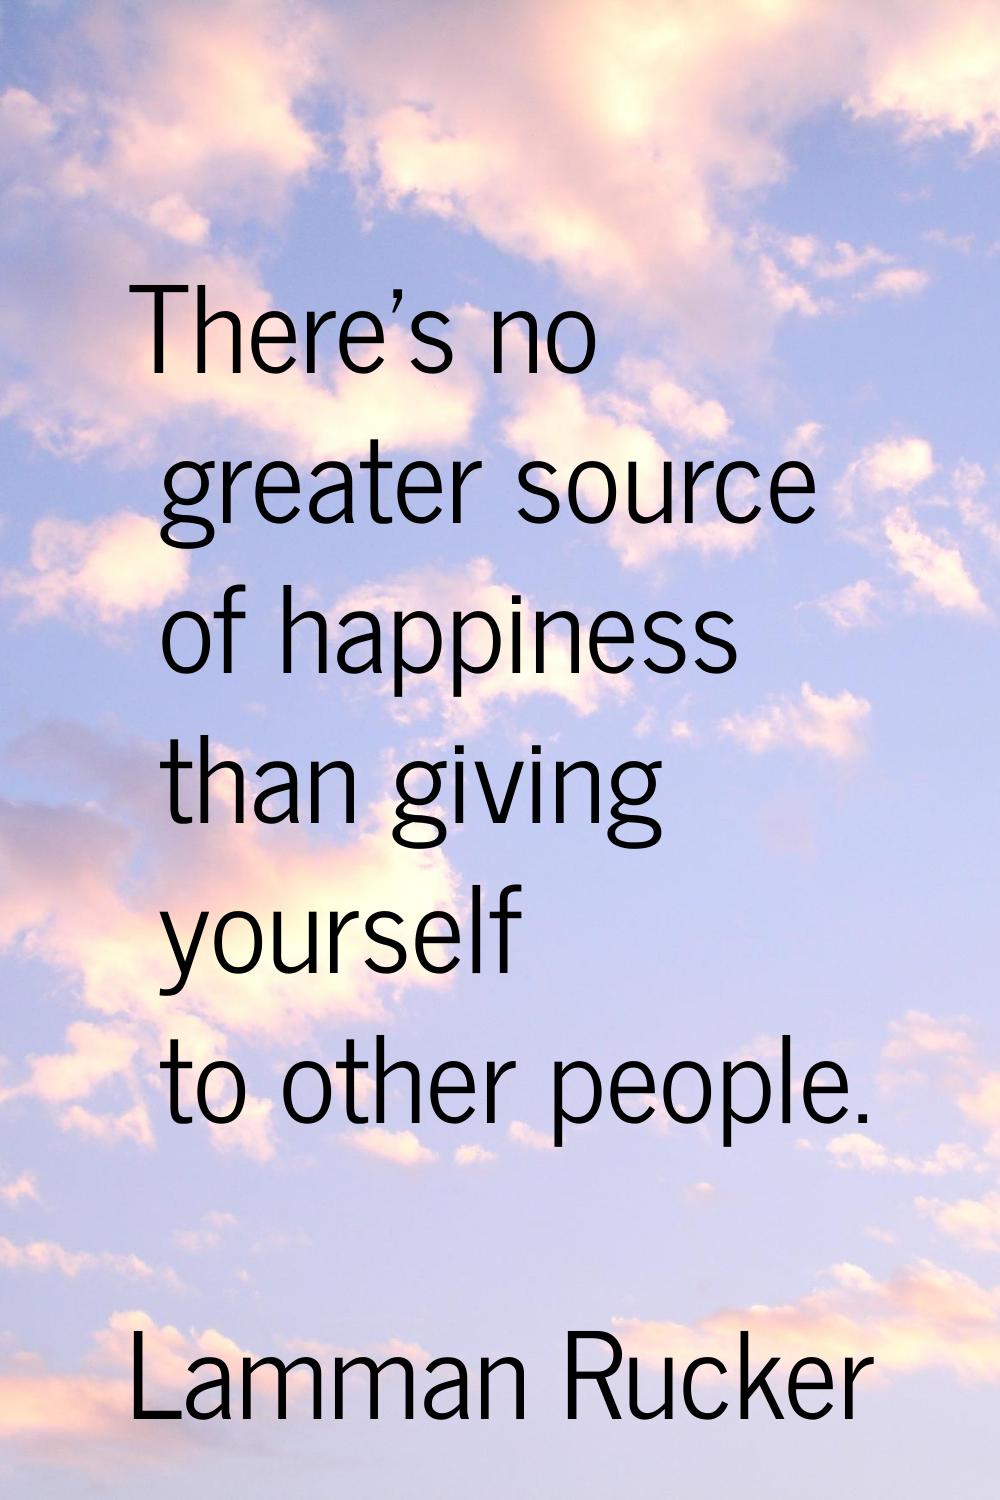 There's no greater source of happiness than giving yourself to other people.